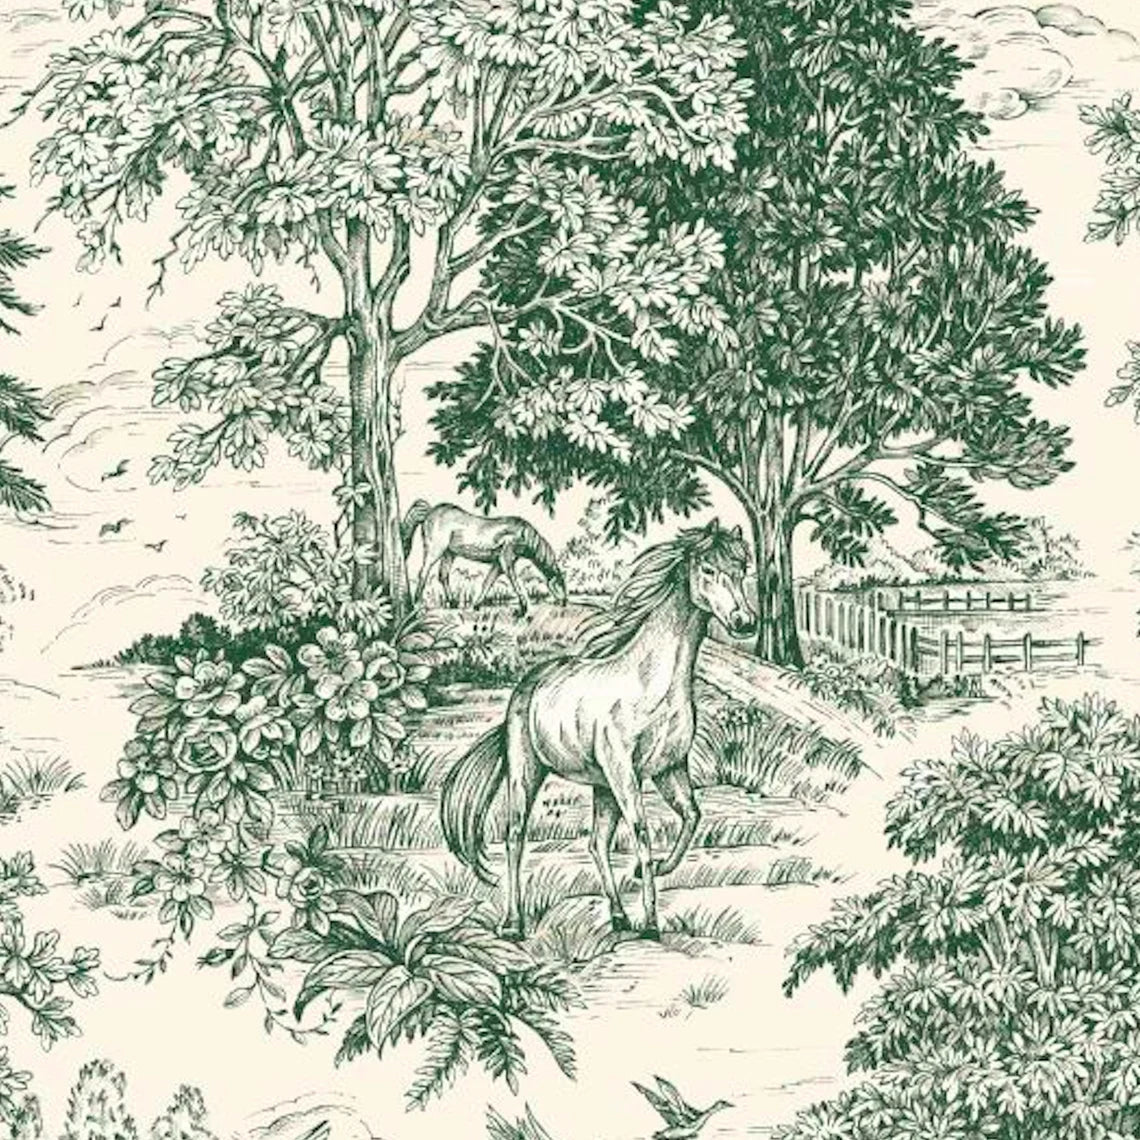 pillow sham in Yellowstone Classic Green Country Toile- Horses, Deer, Dogs- Large Scale